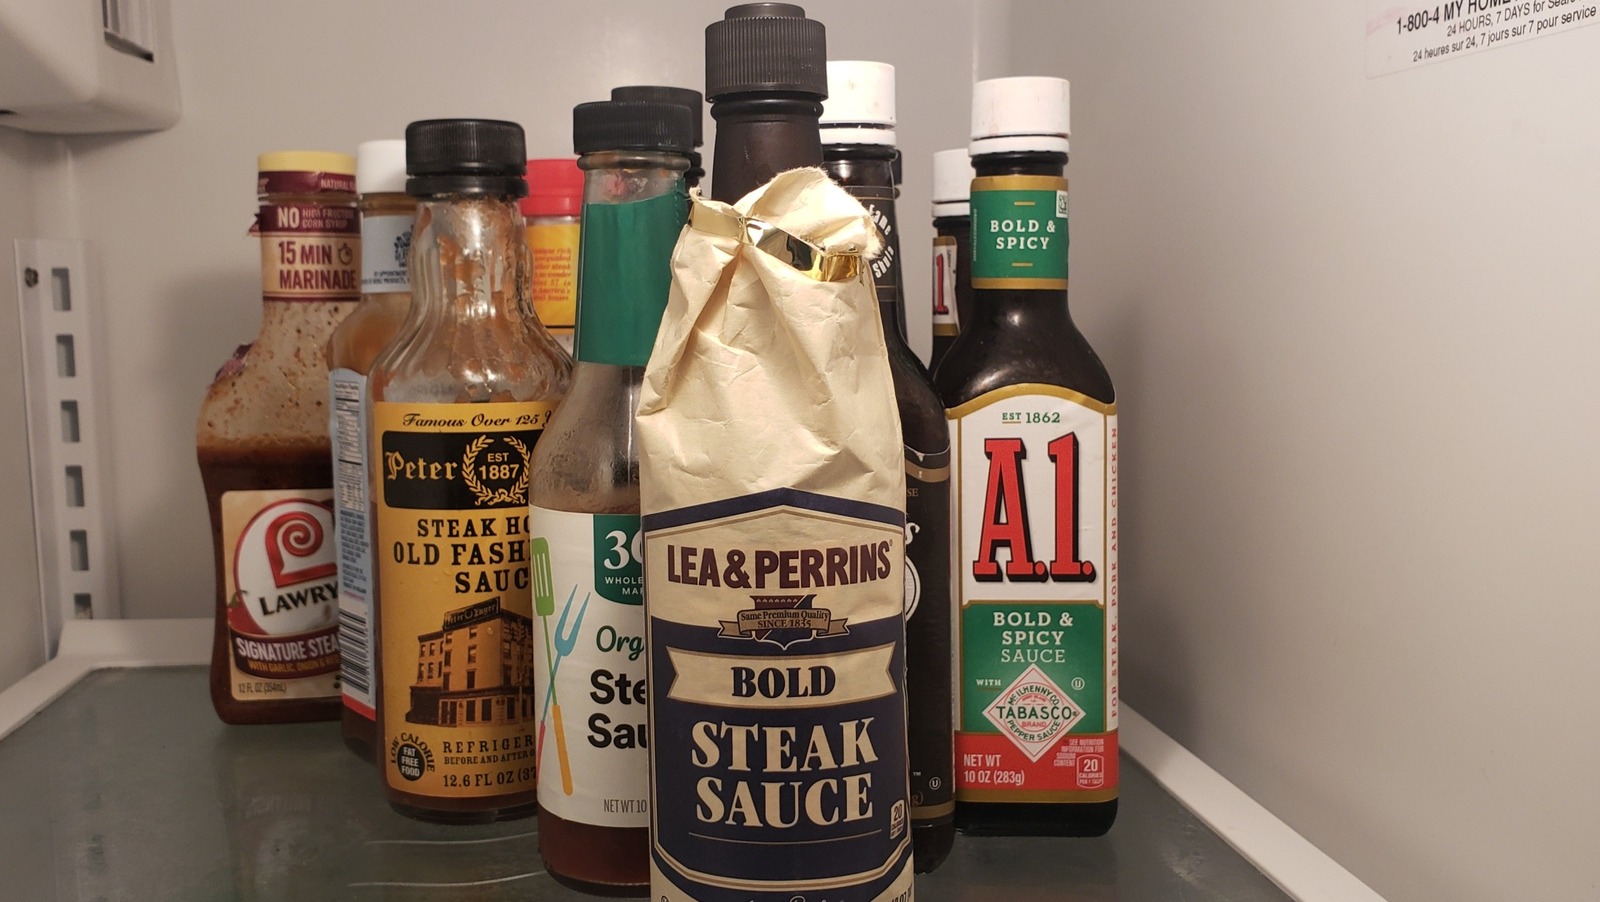 https://www.mashed.com/img/gallery/store-bought-steak-sauces-ranked-from-worst-to-first/l-intro-1656691702.jpg